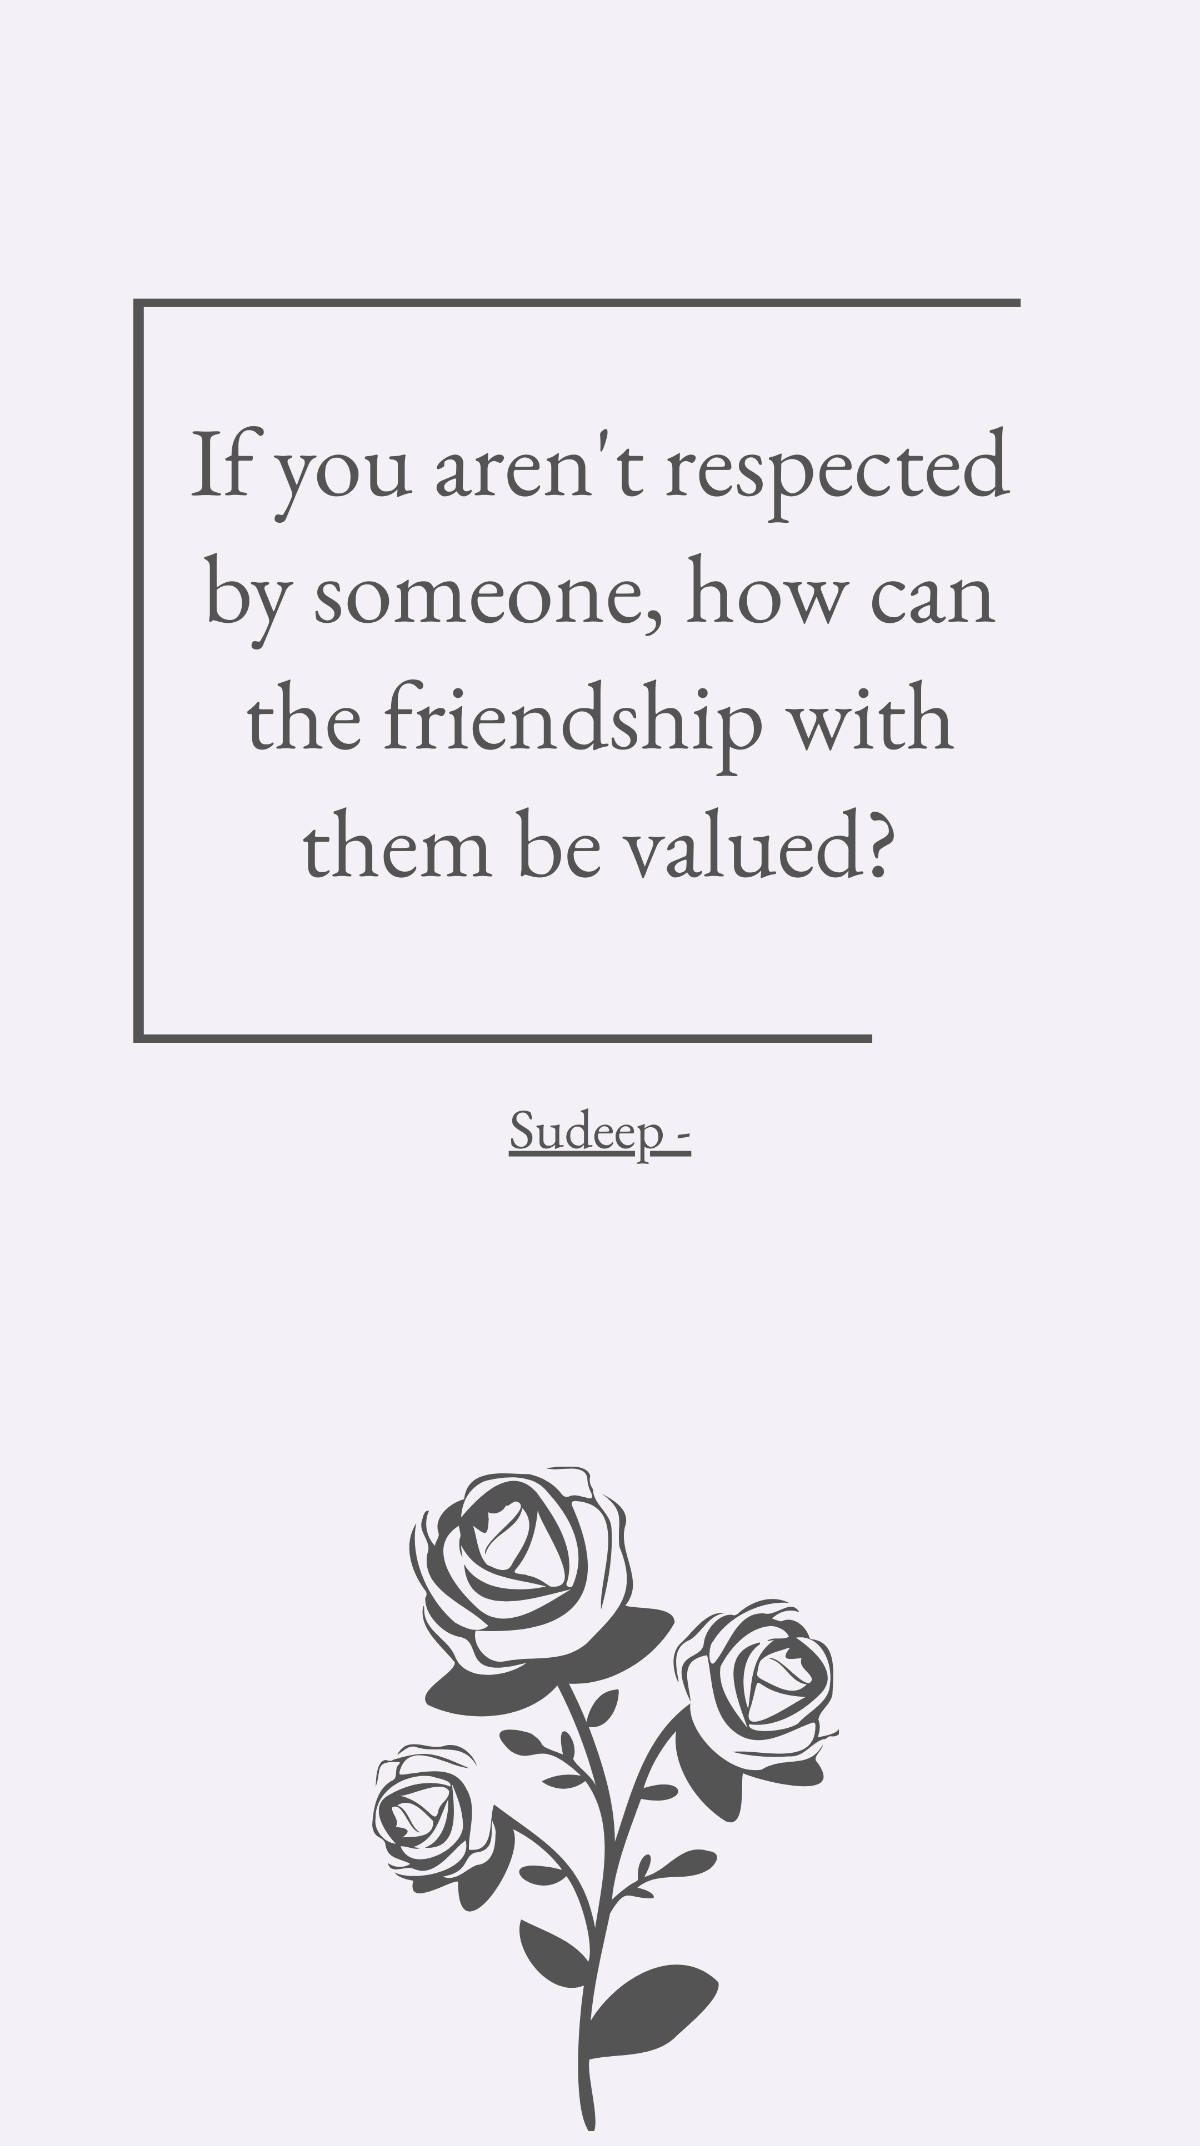 Sudeep - If you aren't respected by someone, how can the friendship with them be valued? Template